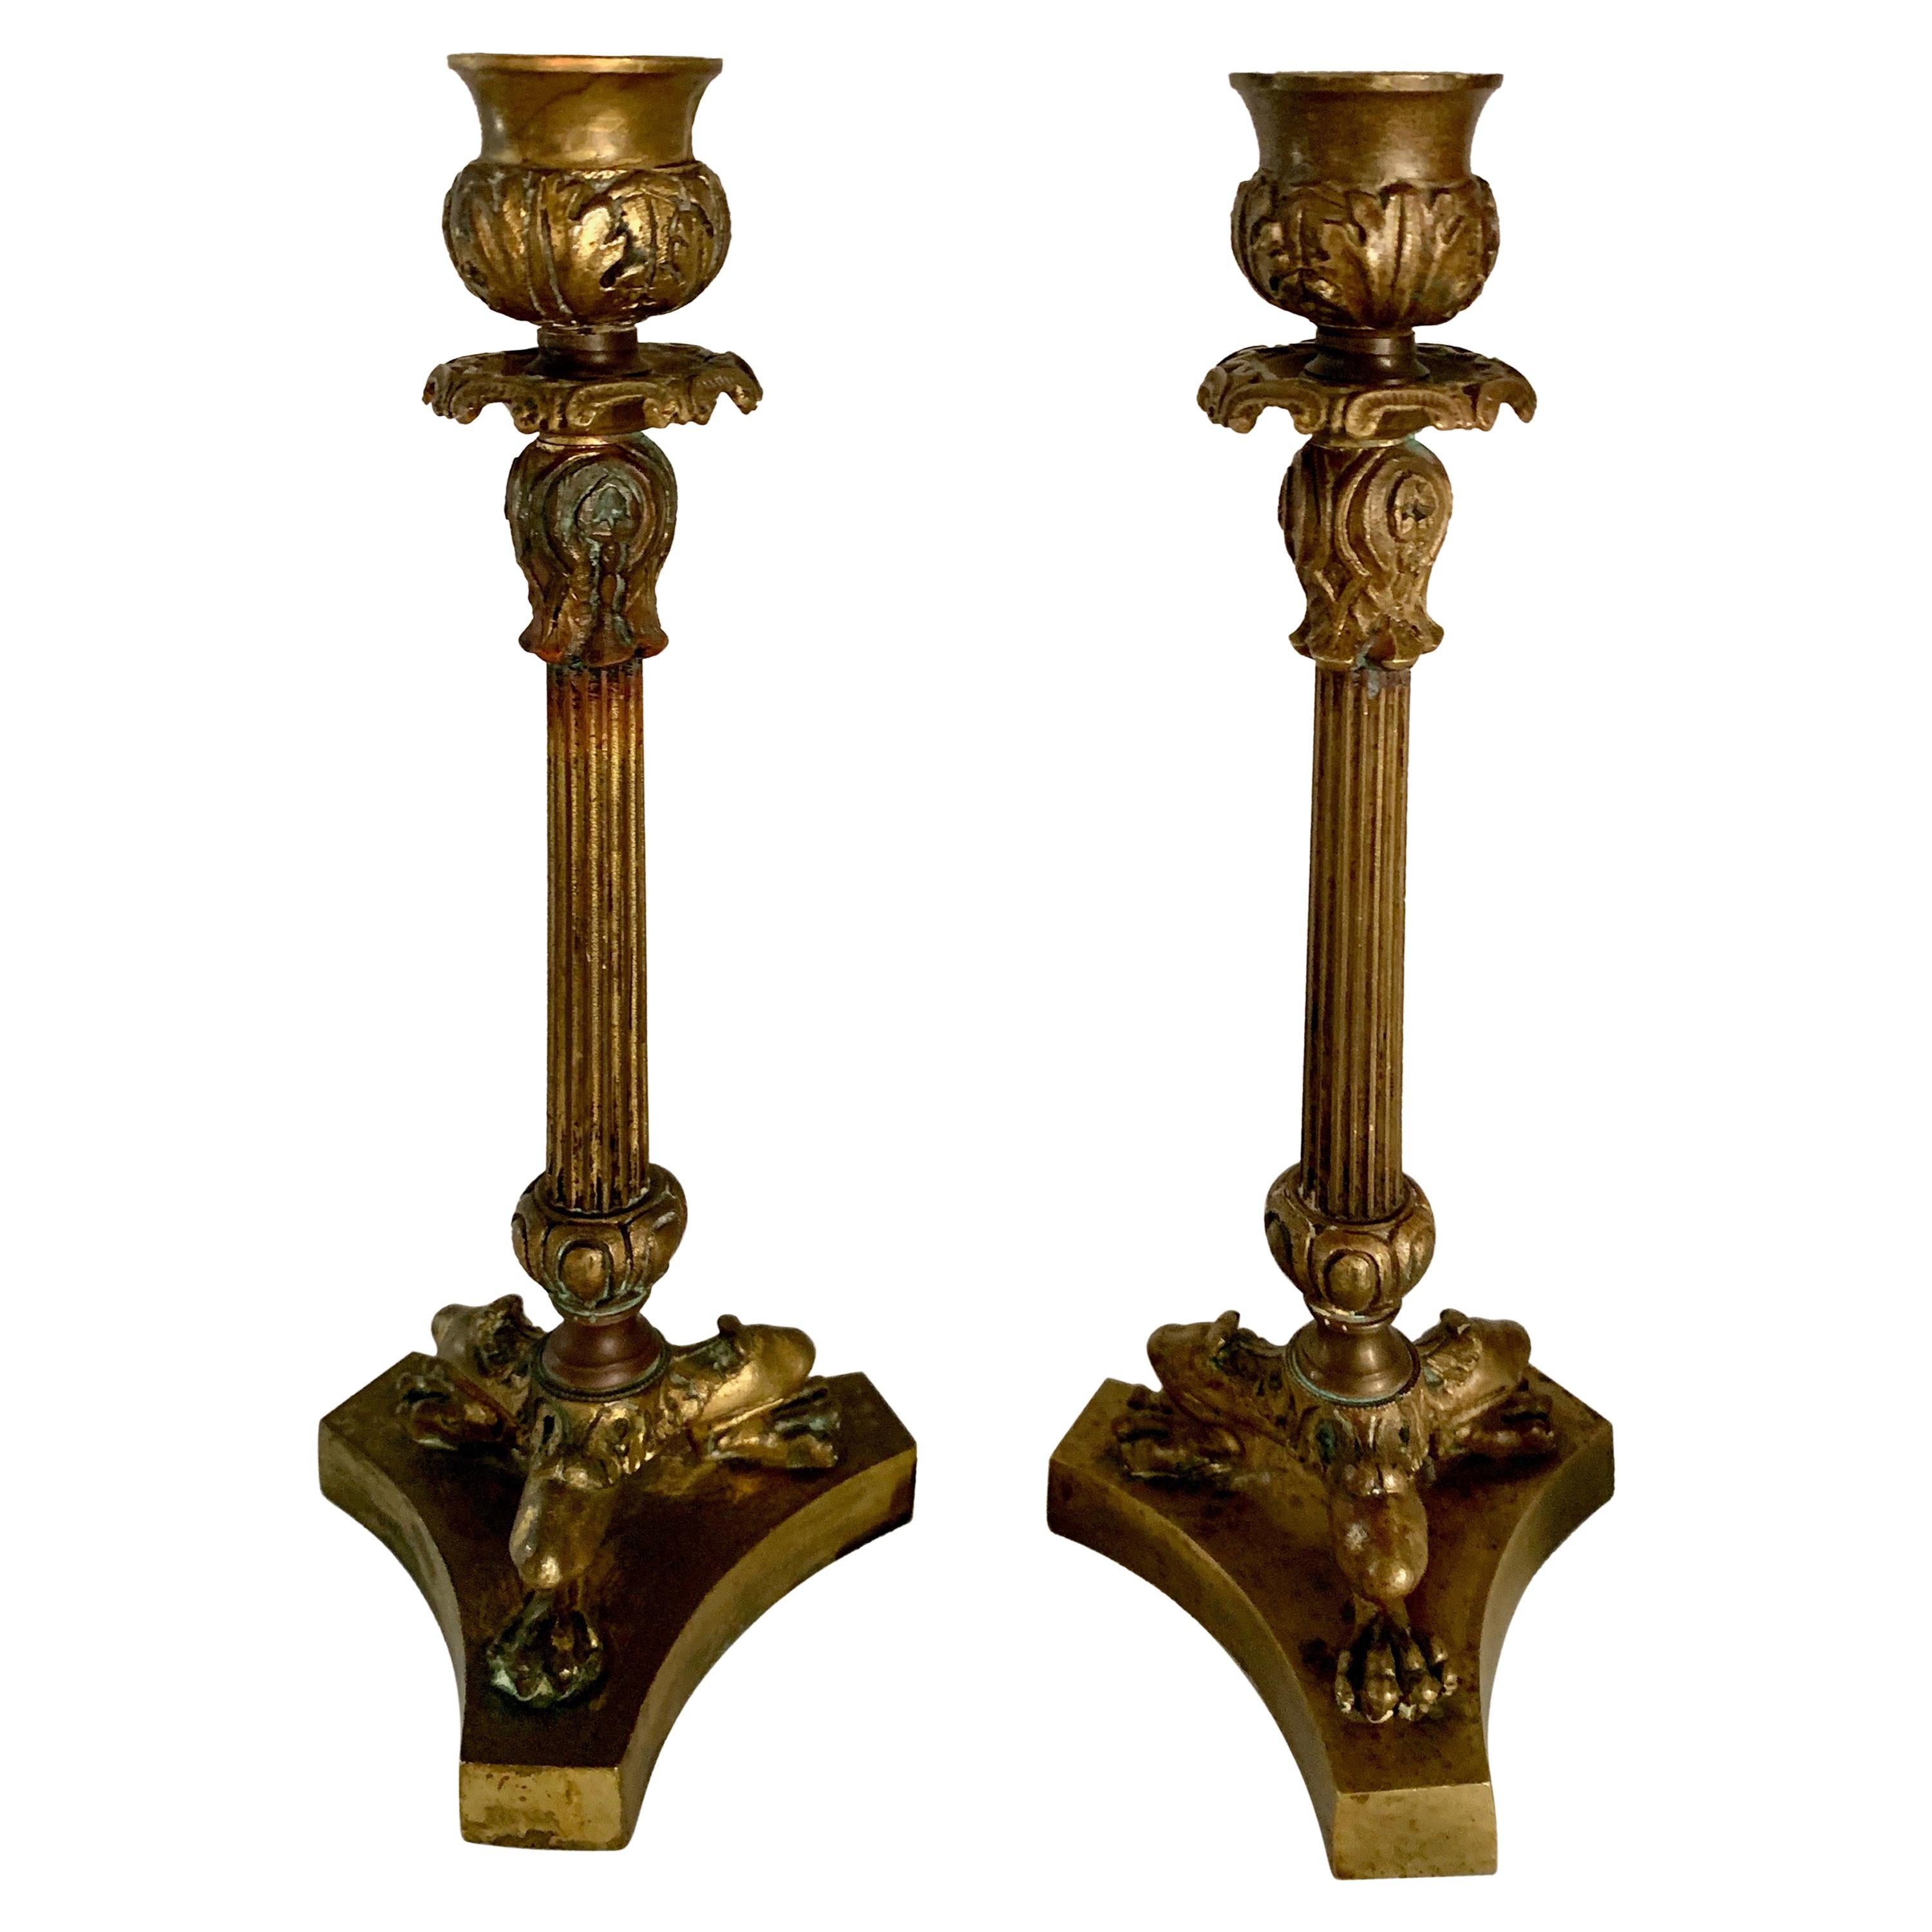 Pair 19th Century French Empire Candlesticks